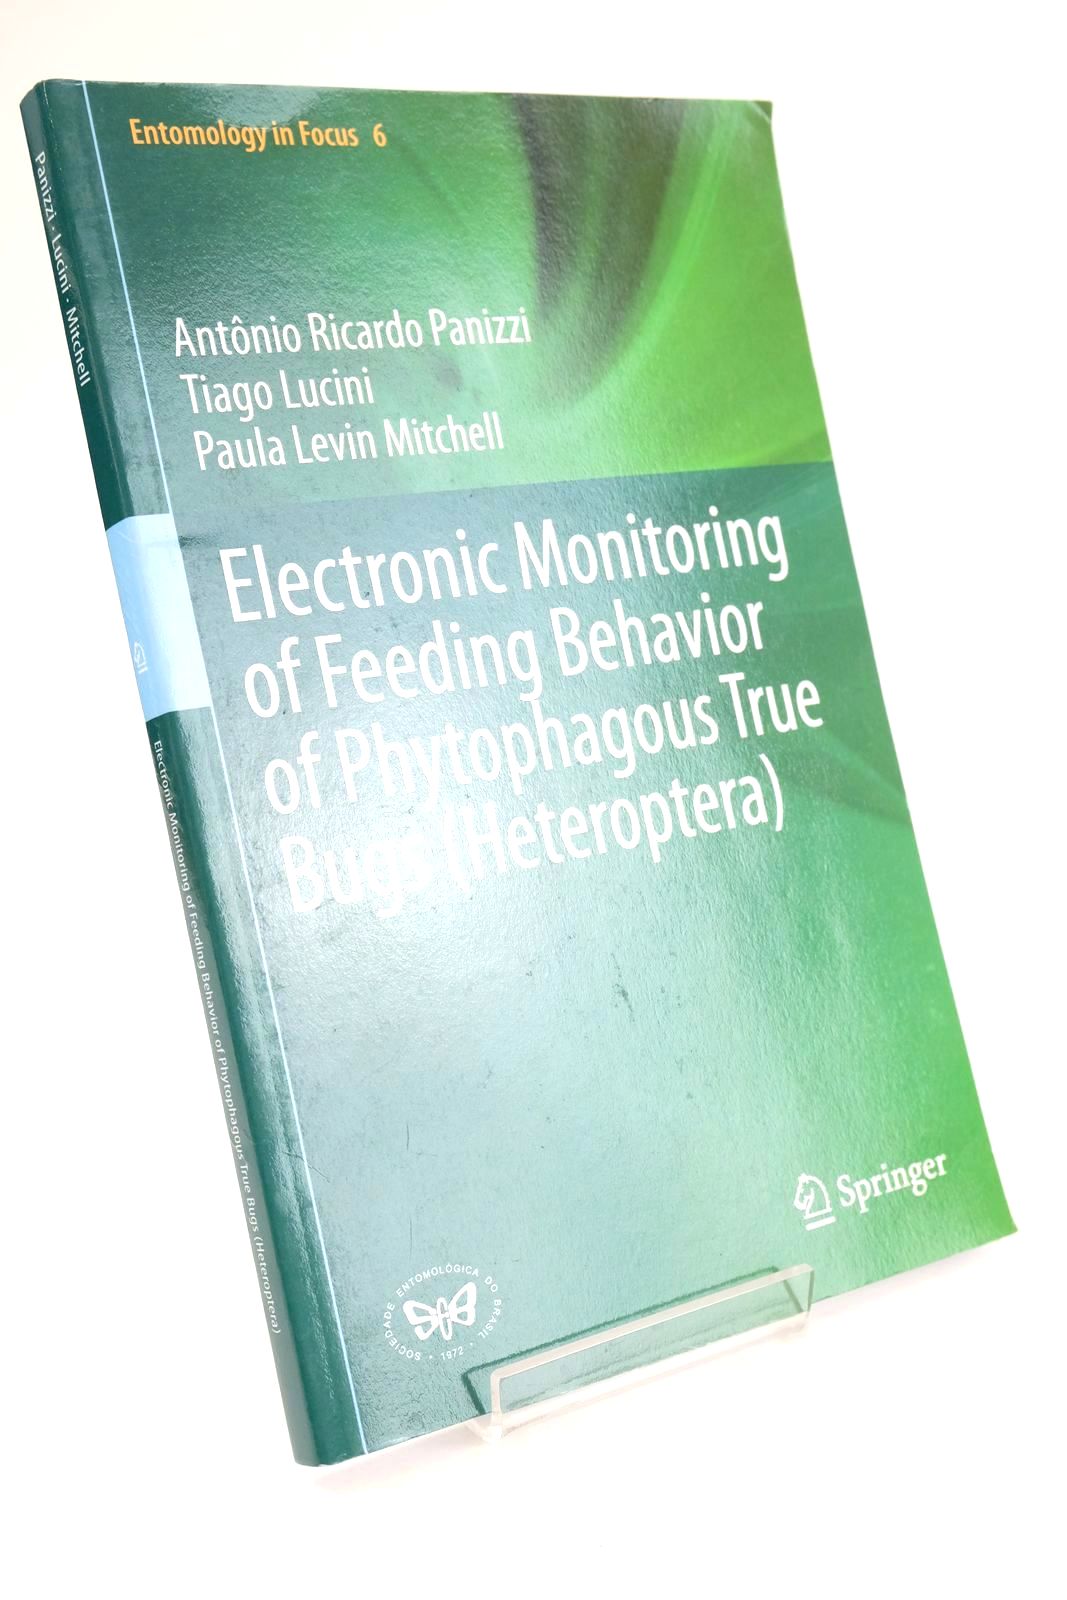 Photo of ELECTRONIC MONITORING OF FEEDING BEHAVIOR OF PHYTOPHAGOUS TRUE BUGS (HETEROPTERA) written by Panizzi, Antonio Lucini, Tiago Mitchell, Paula Levin published by Springer (STOCK CODE: 1324890)  for sale by Stella & Rose's Books